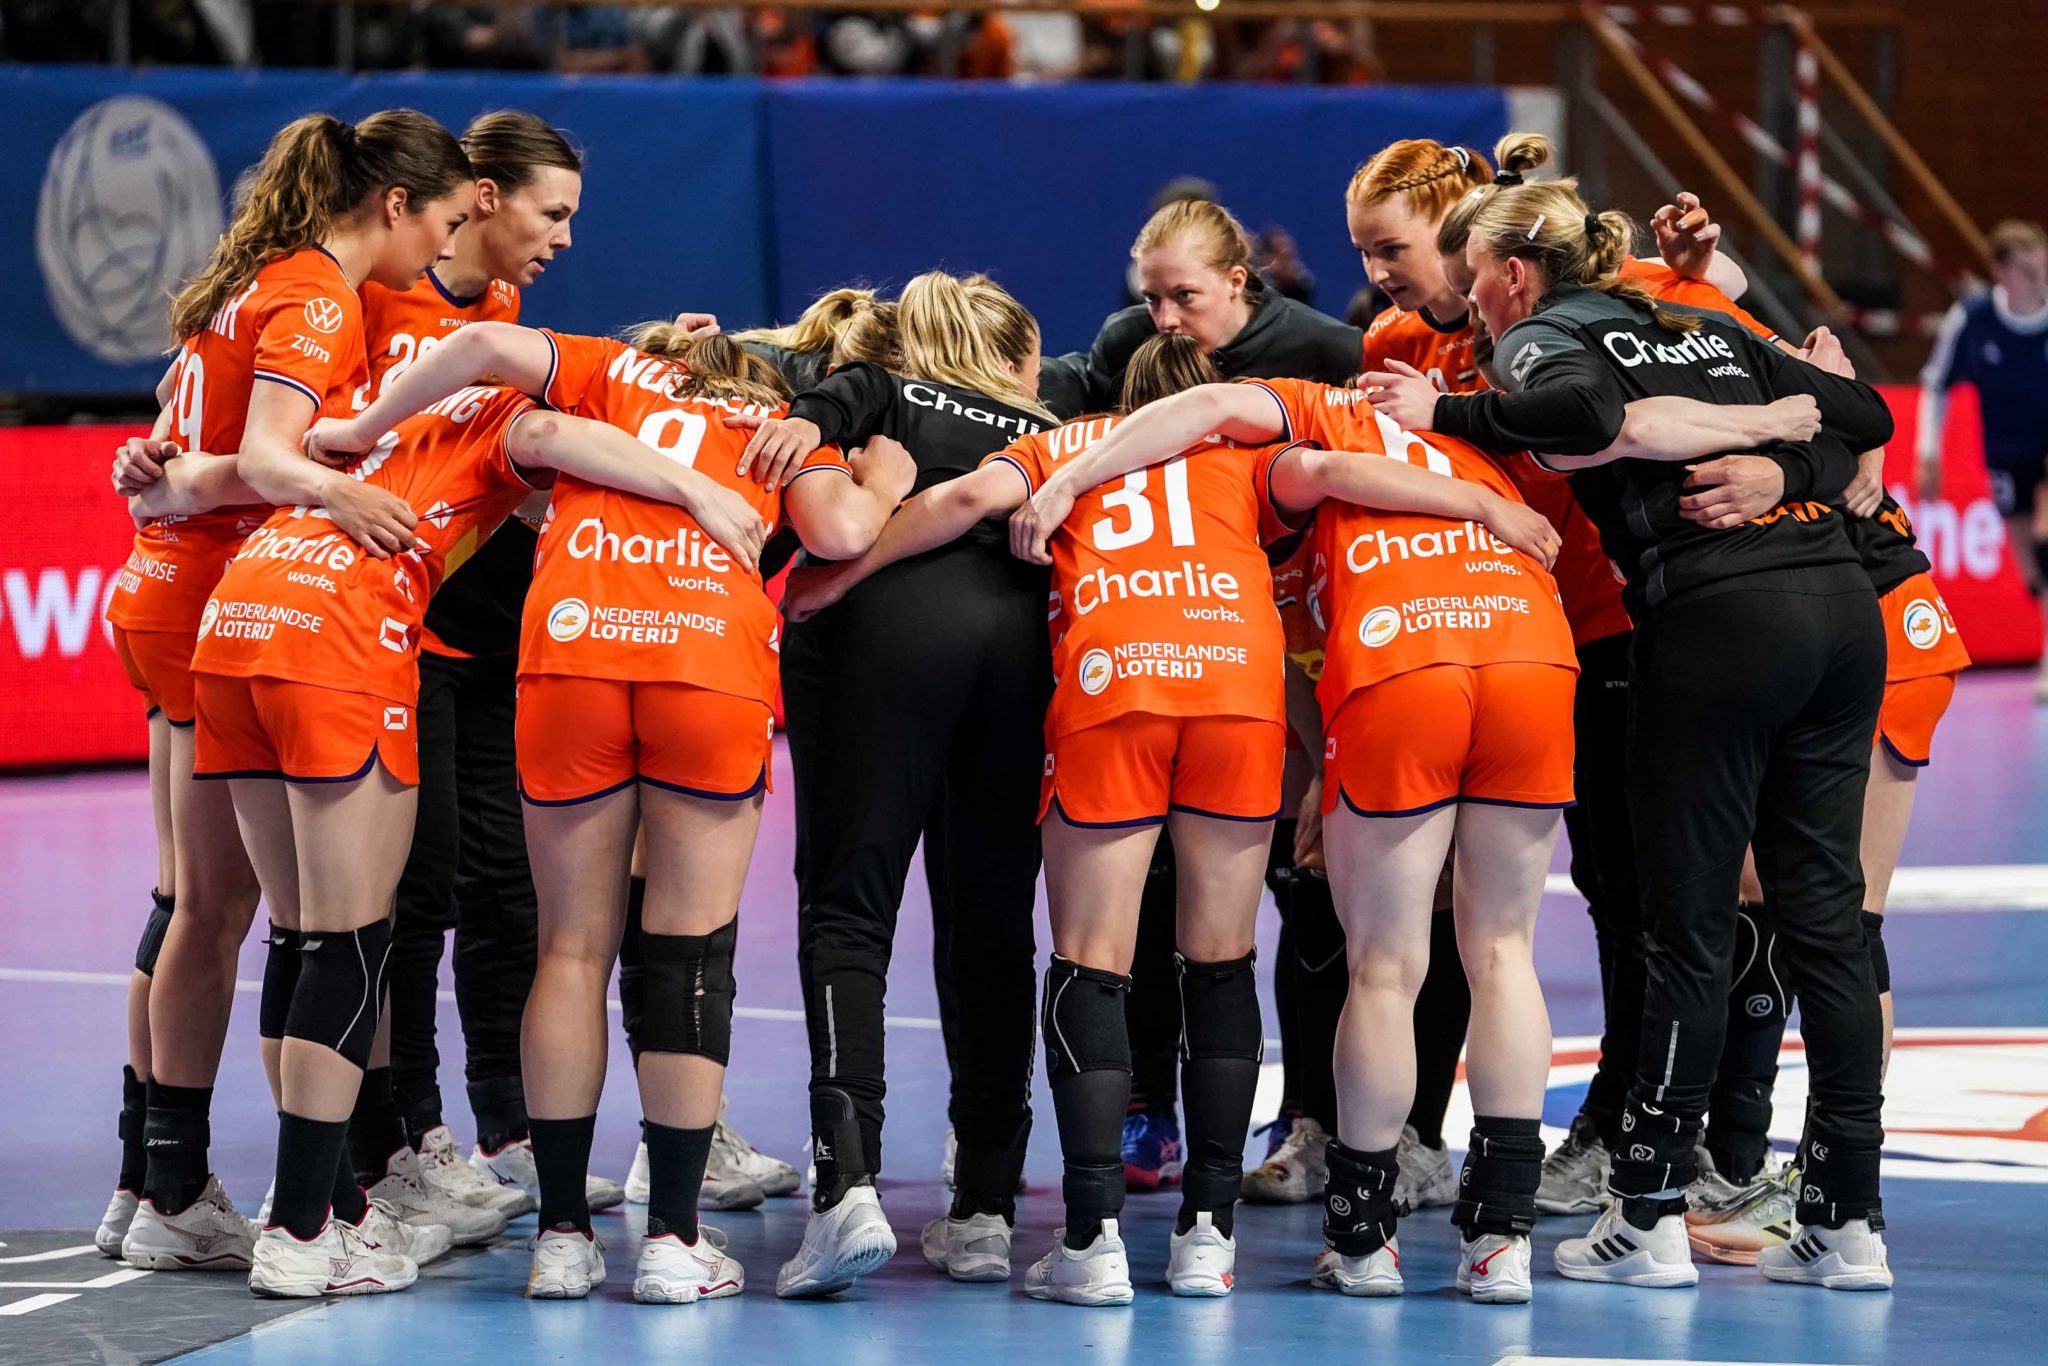 24-04-2022 HANDBAL:NEDERLAND-GRIEKENLAND:ALMERE
Tess Wester Of The Netherlands Forms A Huddle With Her Team Mates Prior To The EHF EURO 2022 Qualifiers Phase 2 Match Between Netherlands And Greece At Topsportcentrum Almere On April 24, 2022 In Almere, Netherlands (Photo By Henk Seppen)